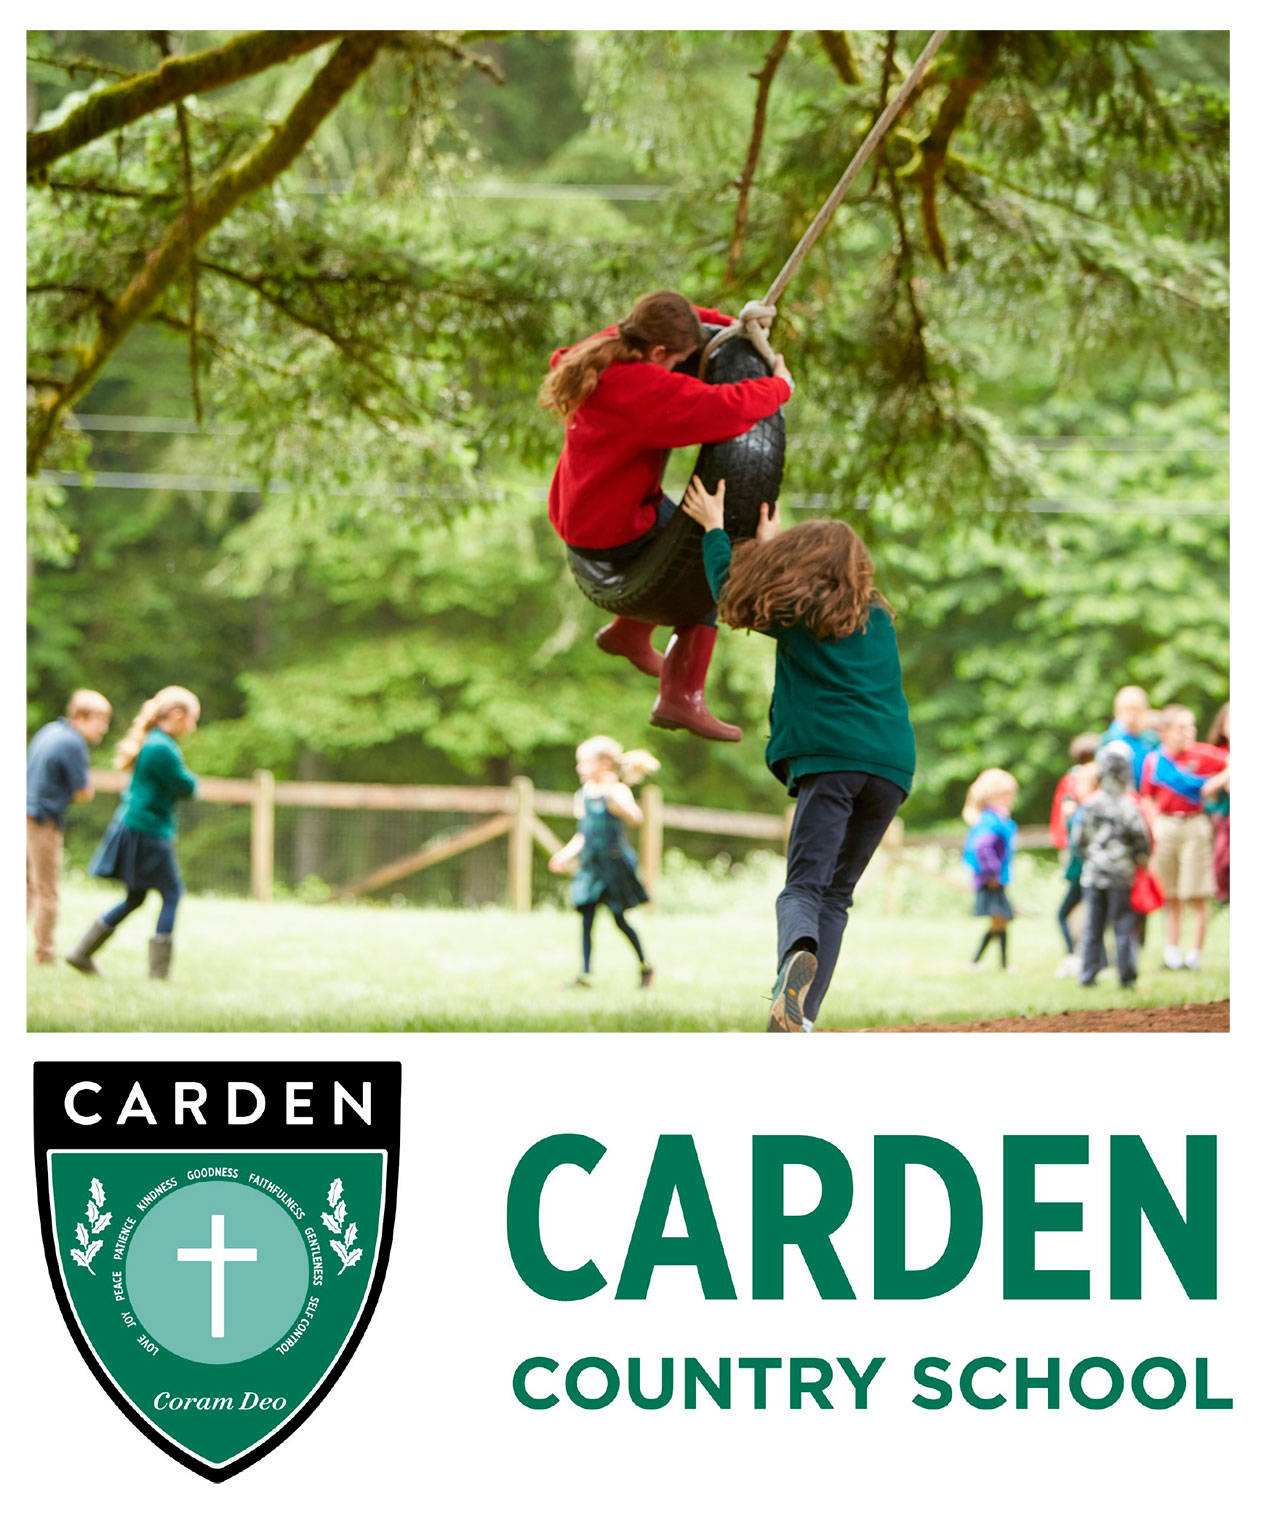 Carden Country School hosts open house